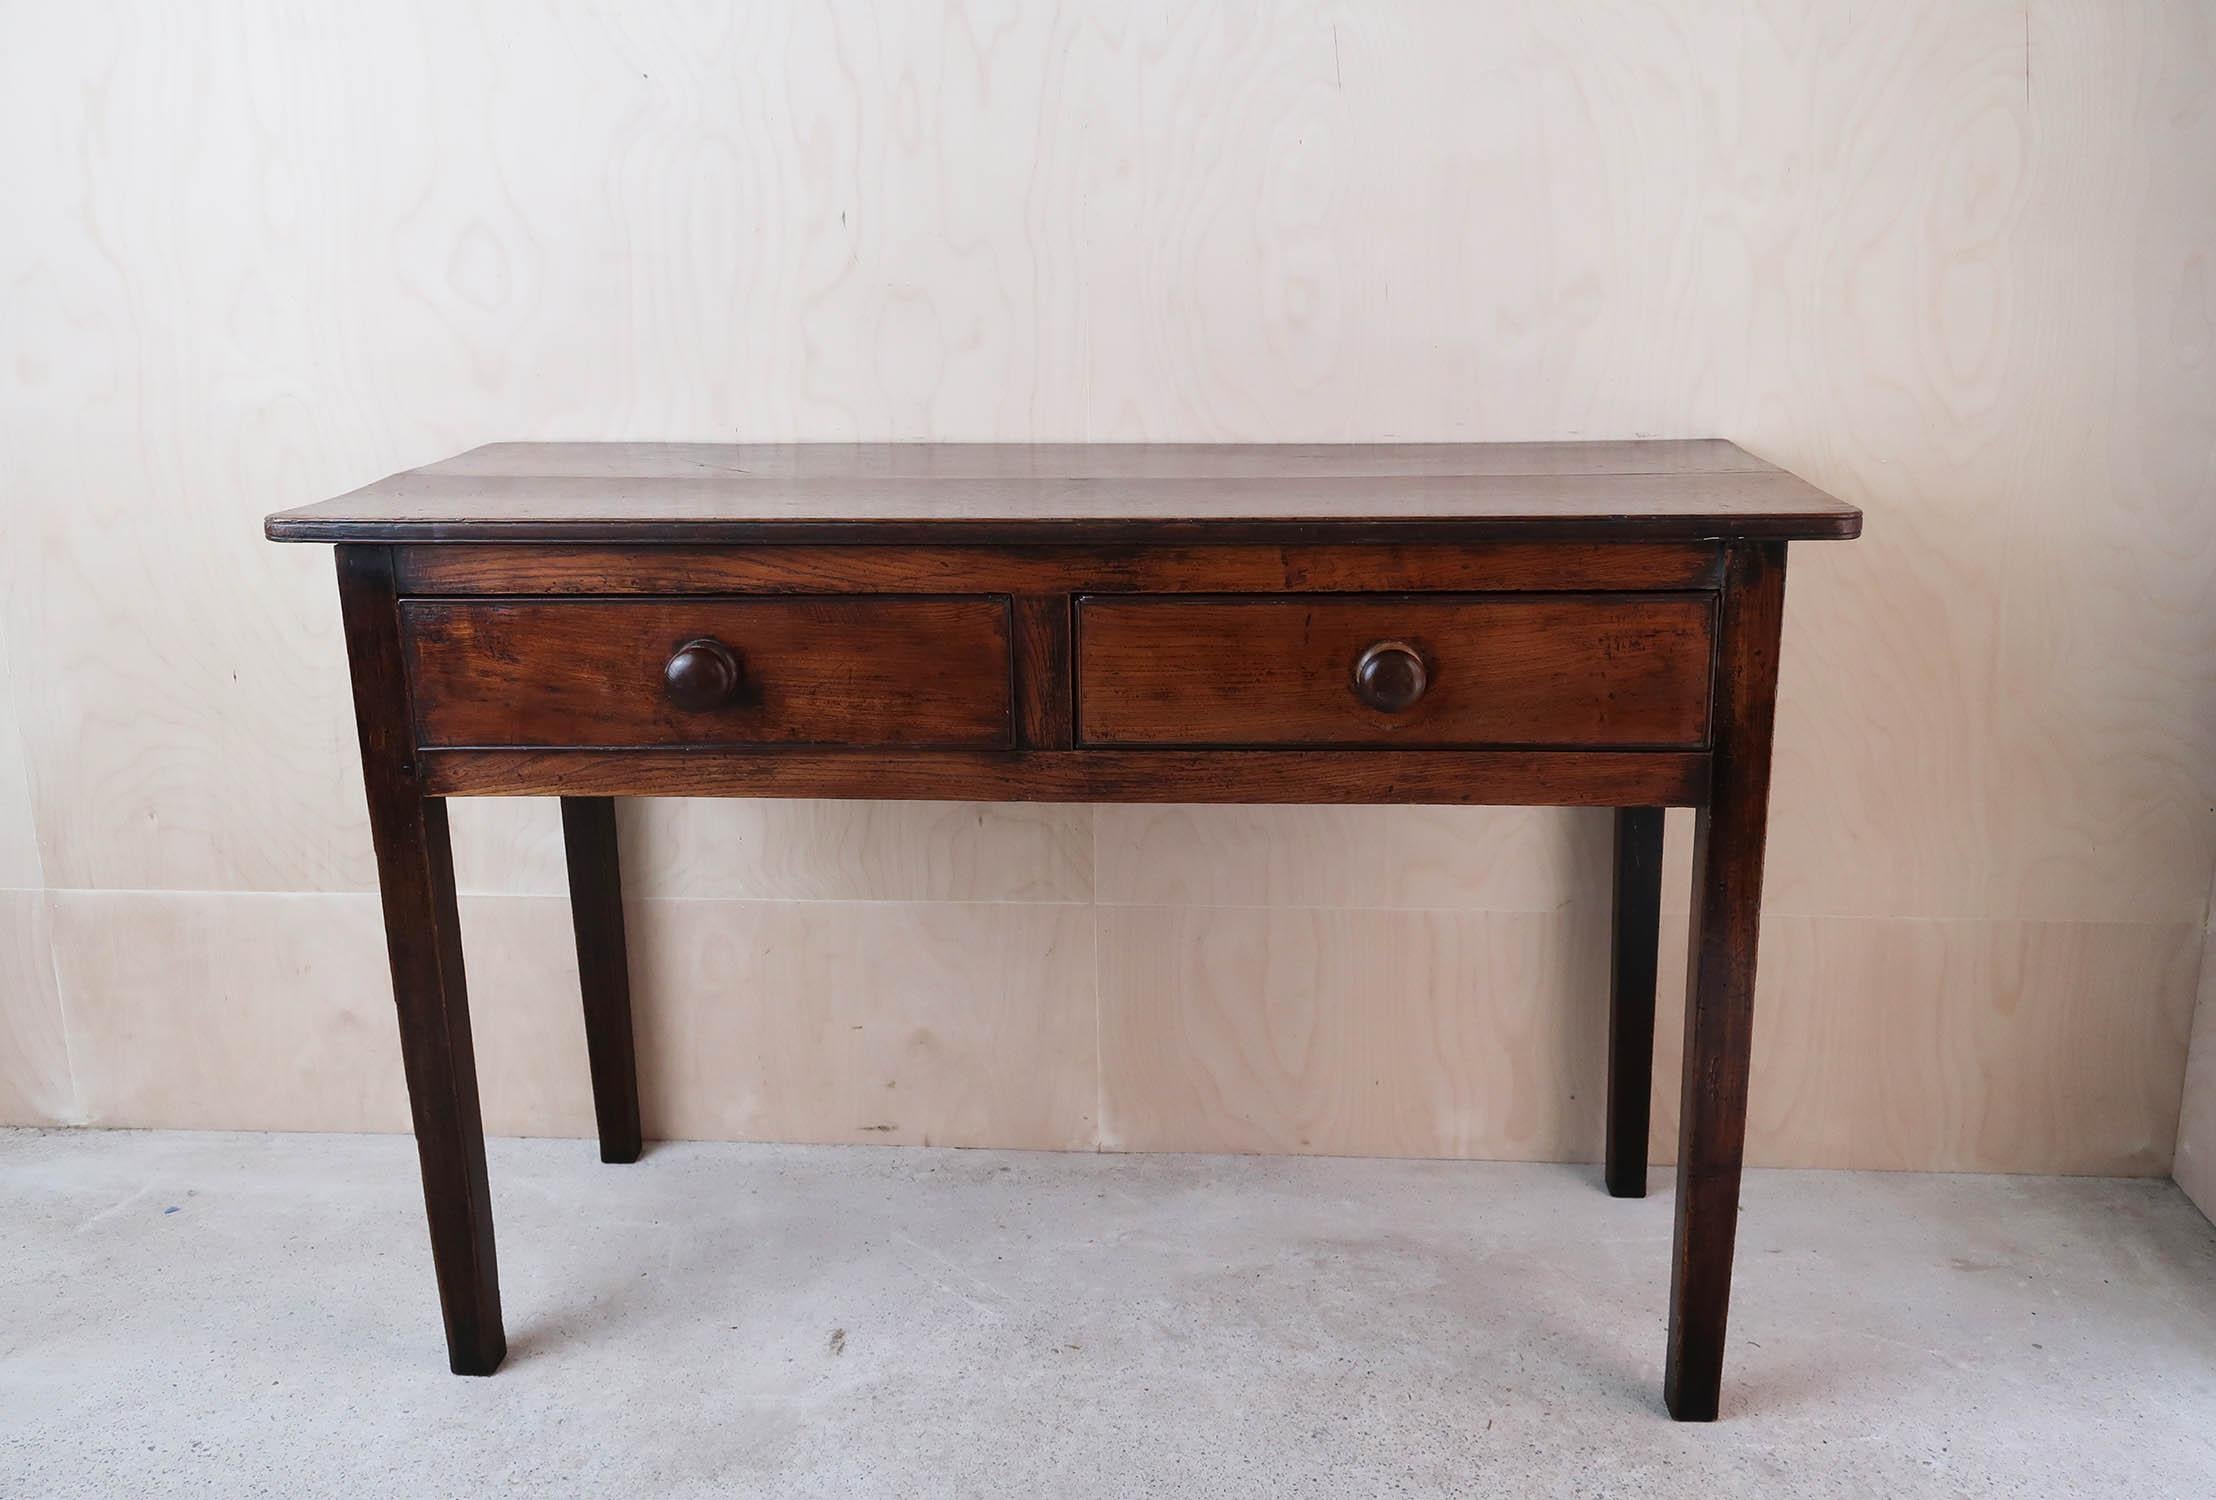 Fabulous oak and elm dresser base

Wonderful Simple lines

Lovely original patina and colour

Charming old patch to the left side of the top

Free Uk shipping





